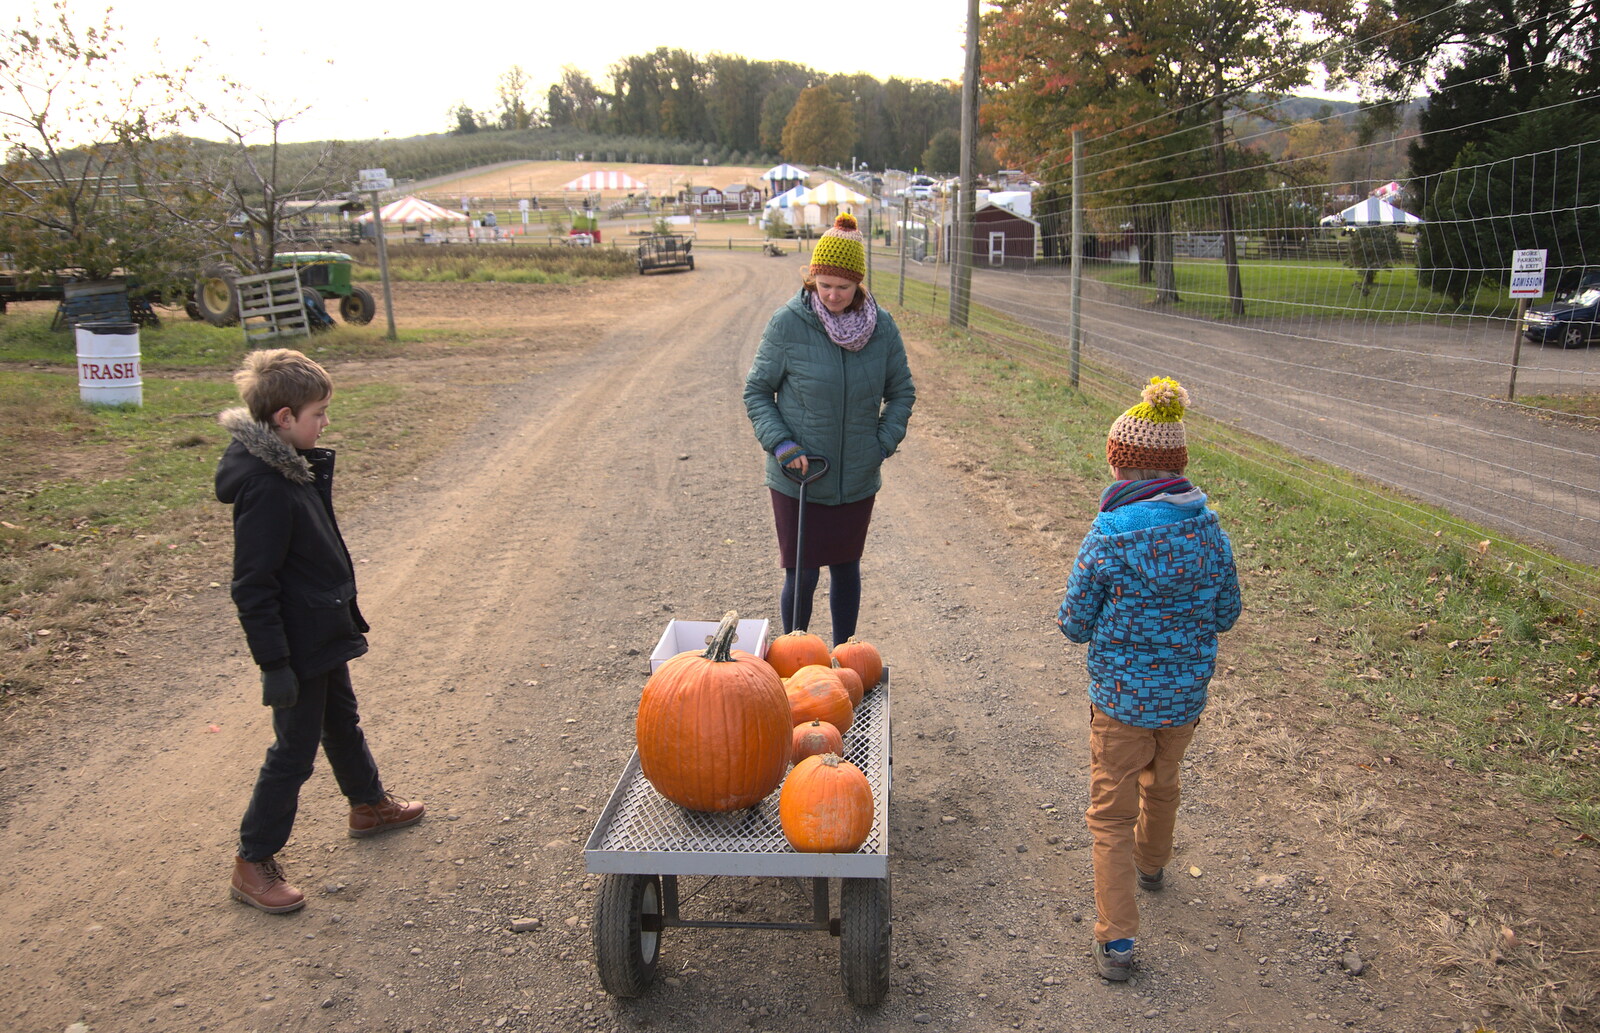 We haul our booty back to the pay point from Pumpkin Picking at Alstede Farm, Chester, Morris County, New Jersey - 24th October 2018